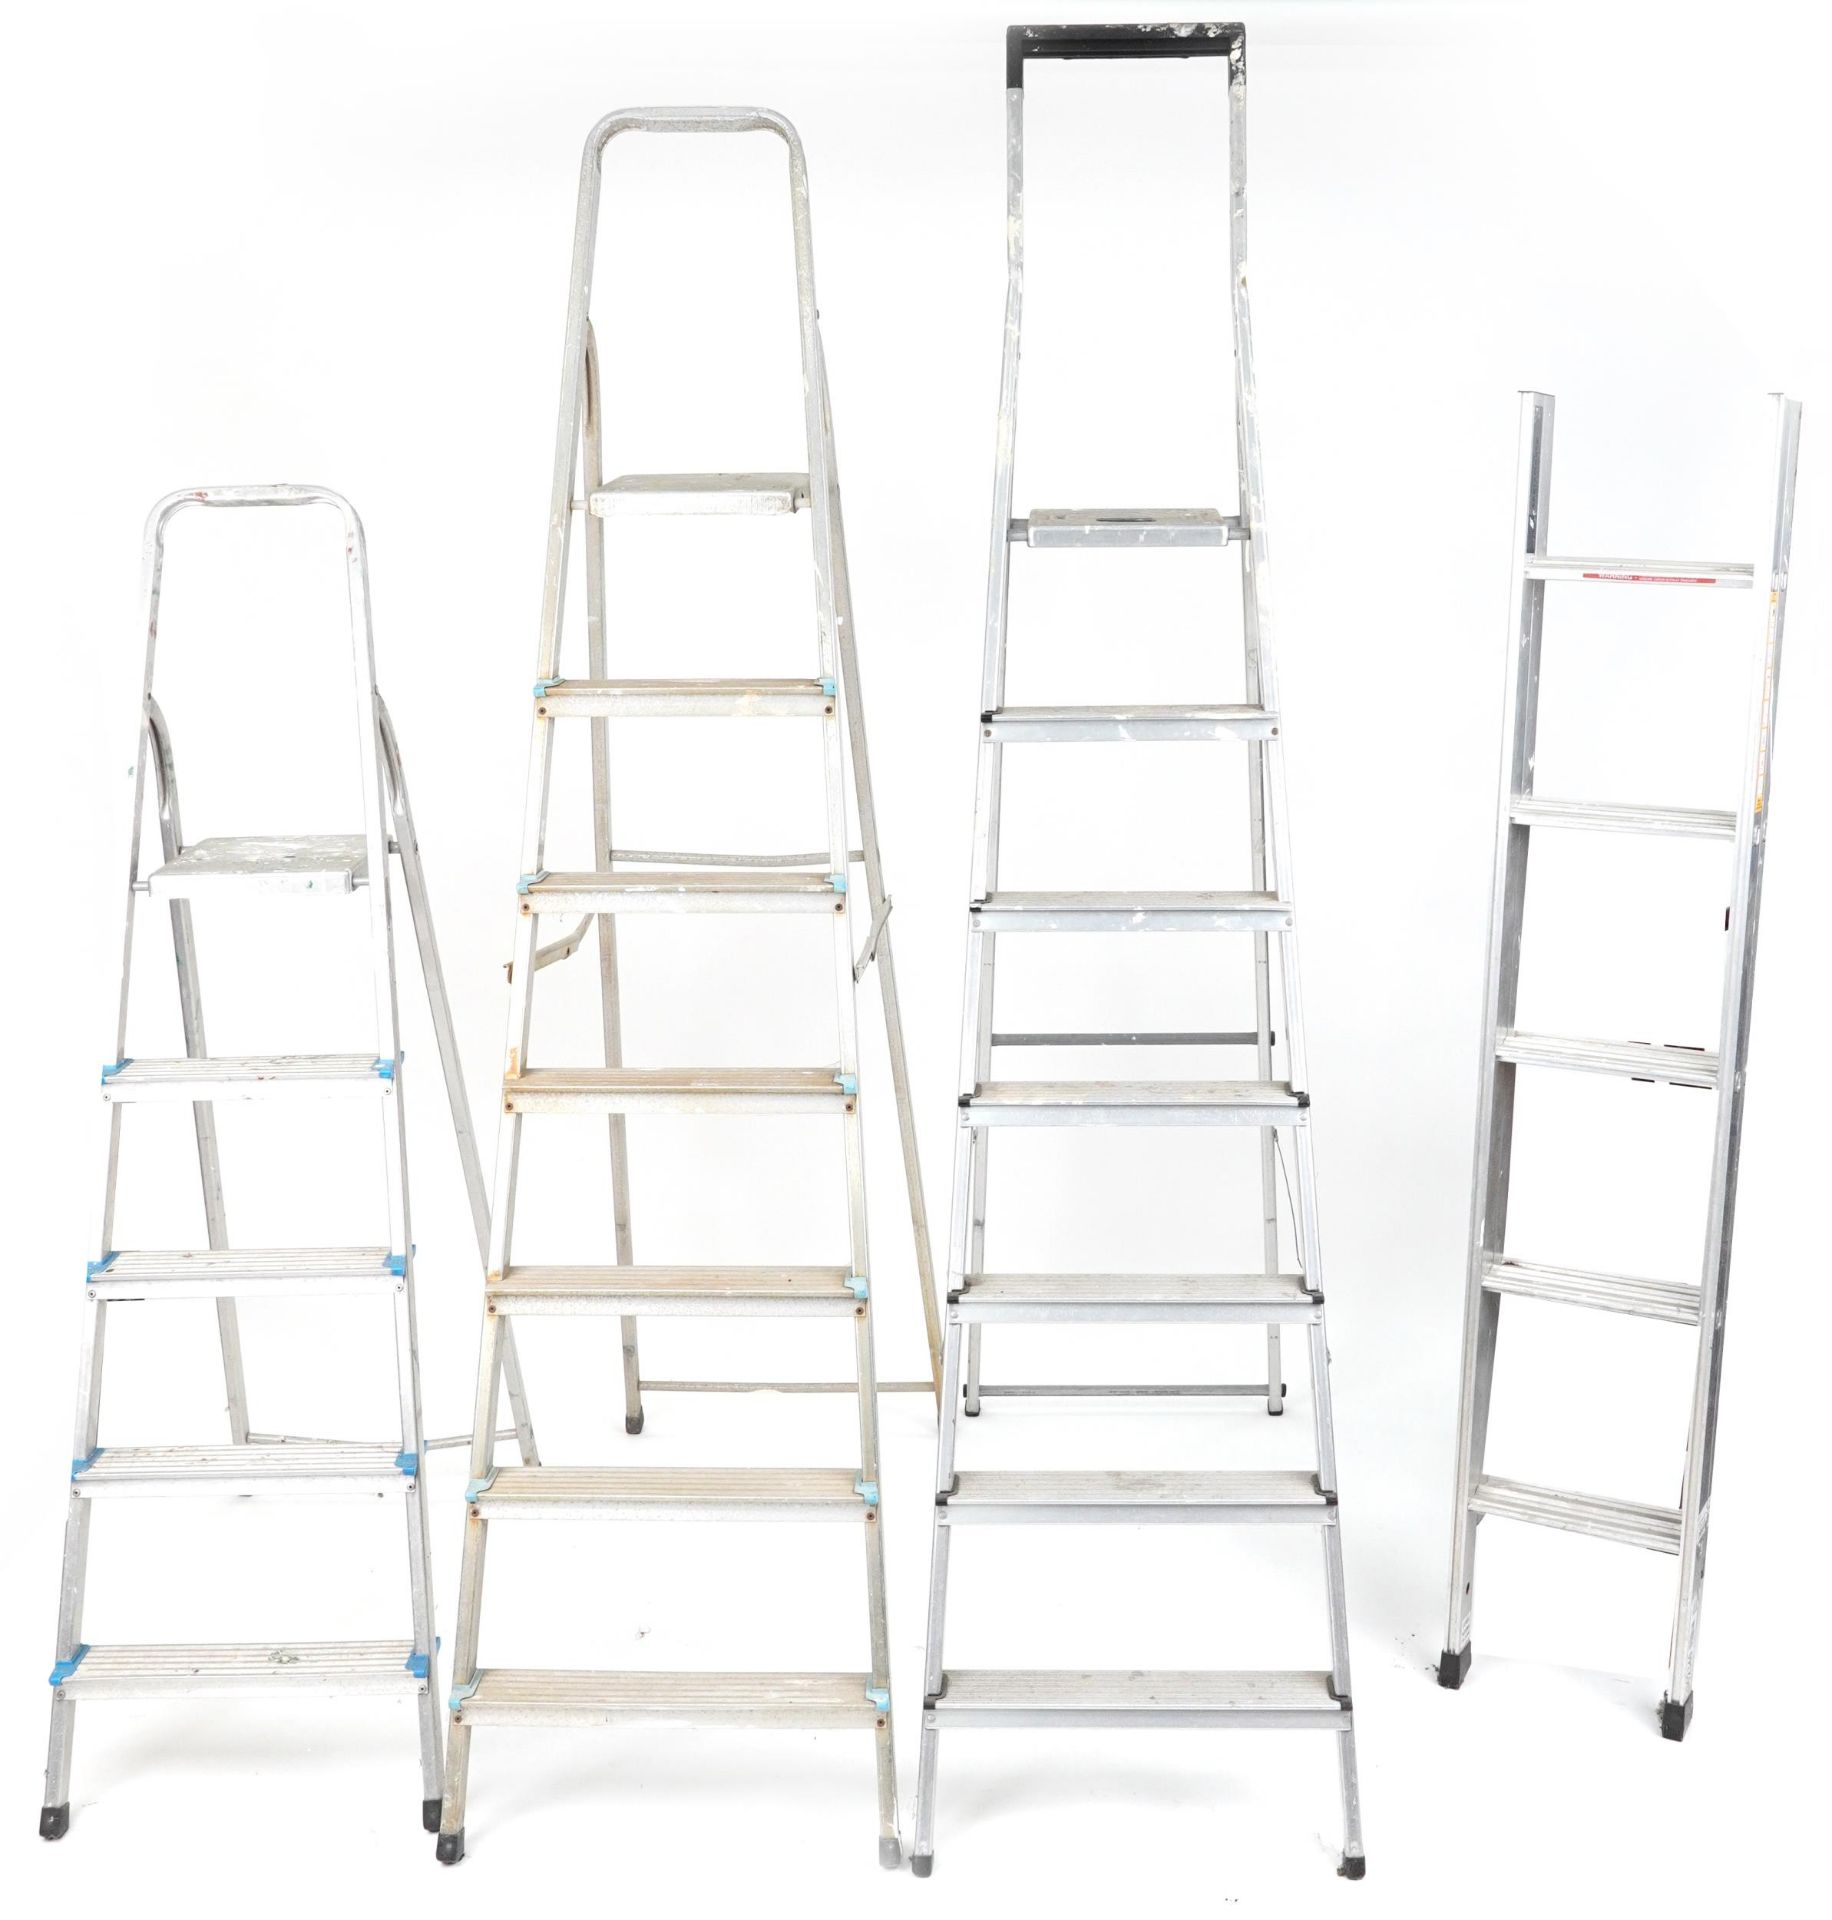 Four aluminium ladders including Youngman Spacemaker loft ladder and two Beldray stepladders, the